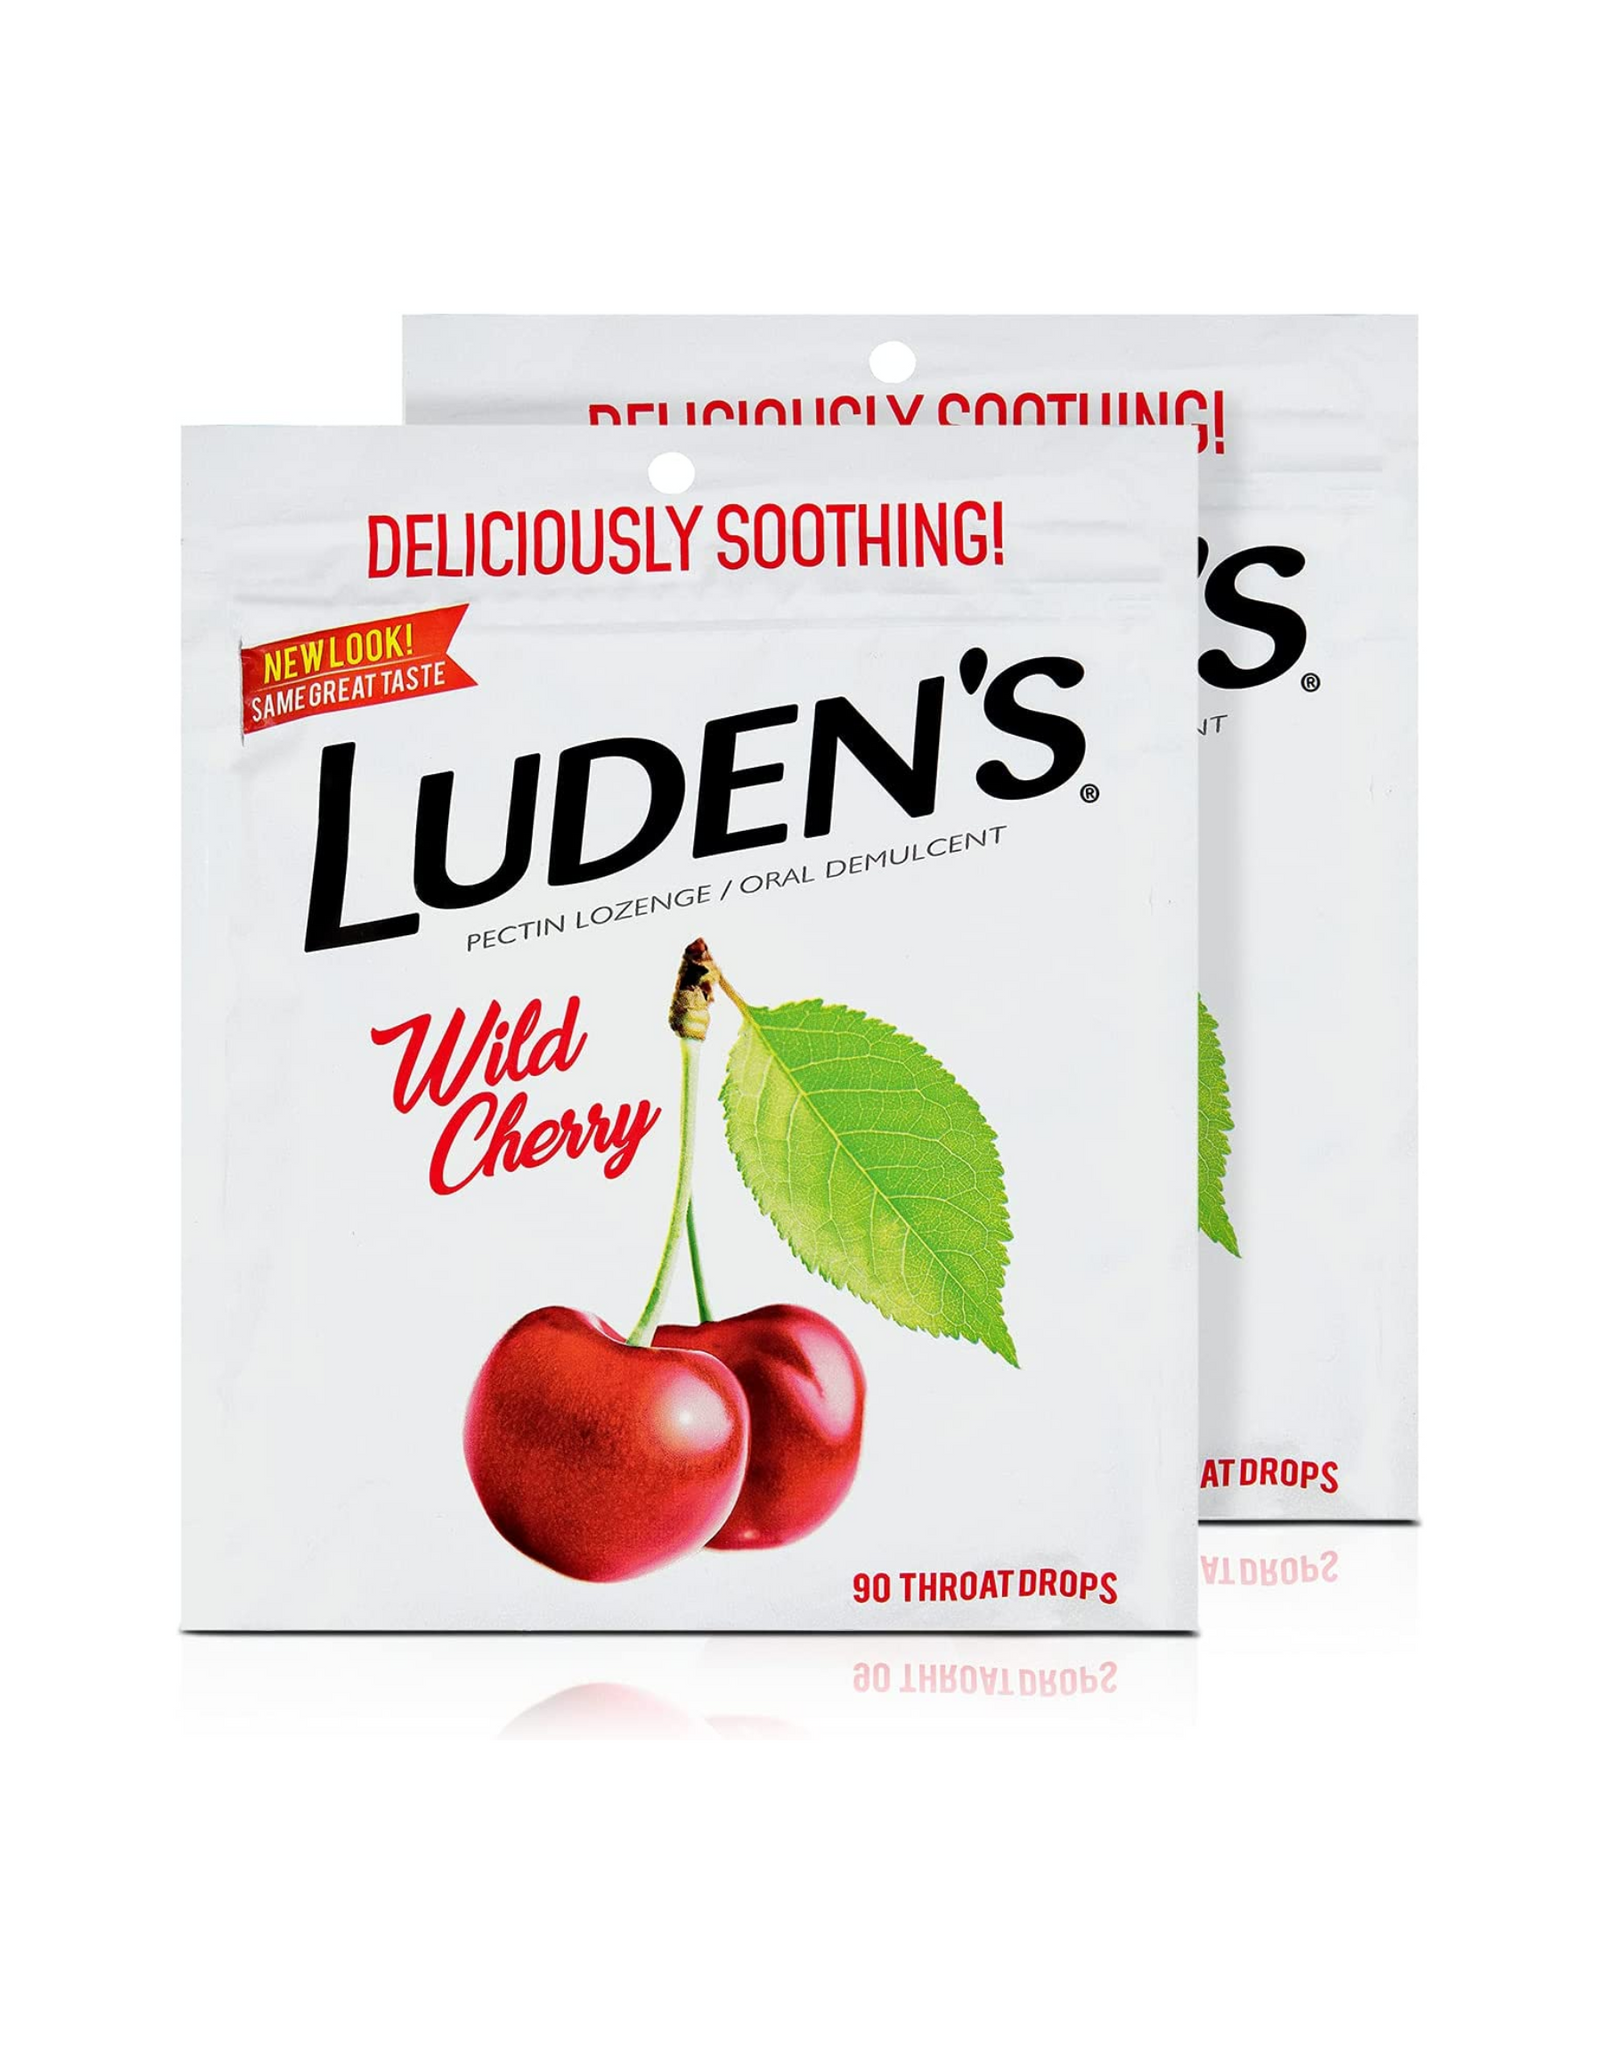 Ludens Throat Drops, Wild Cherry, 90 Throat Drops (Pack of 2)